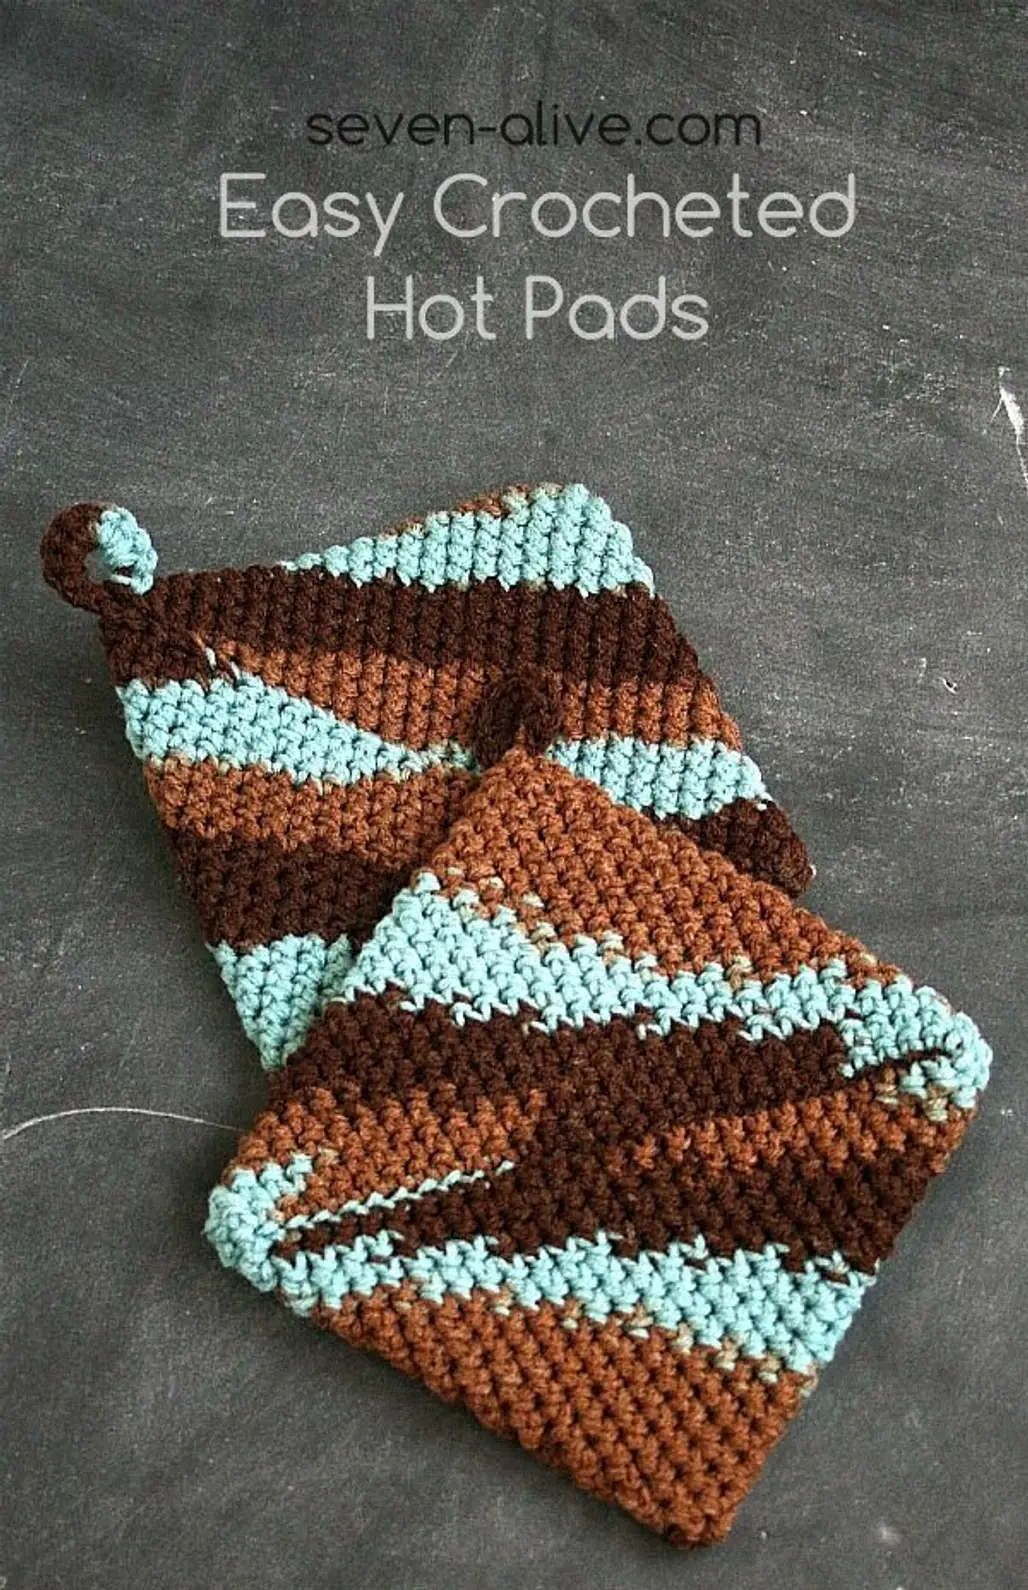 Easy Crocheted Hot Pads